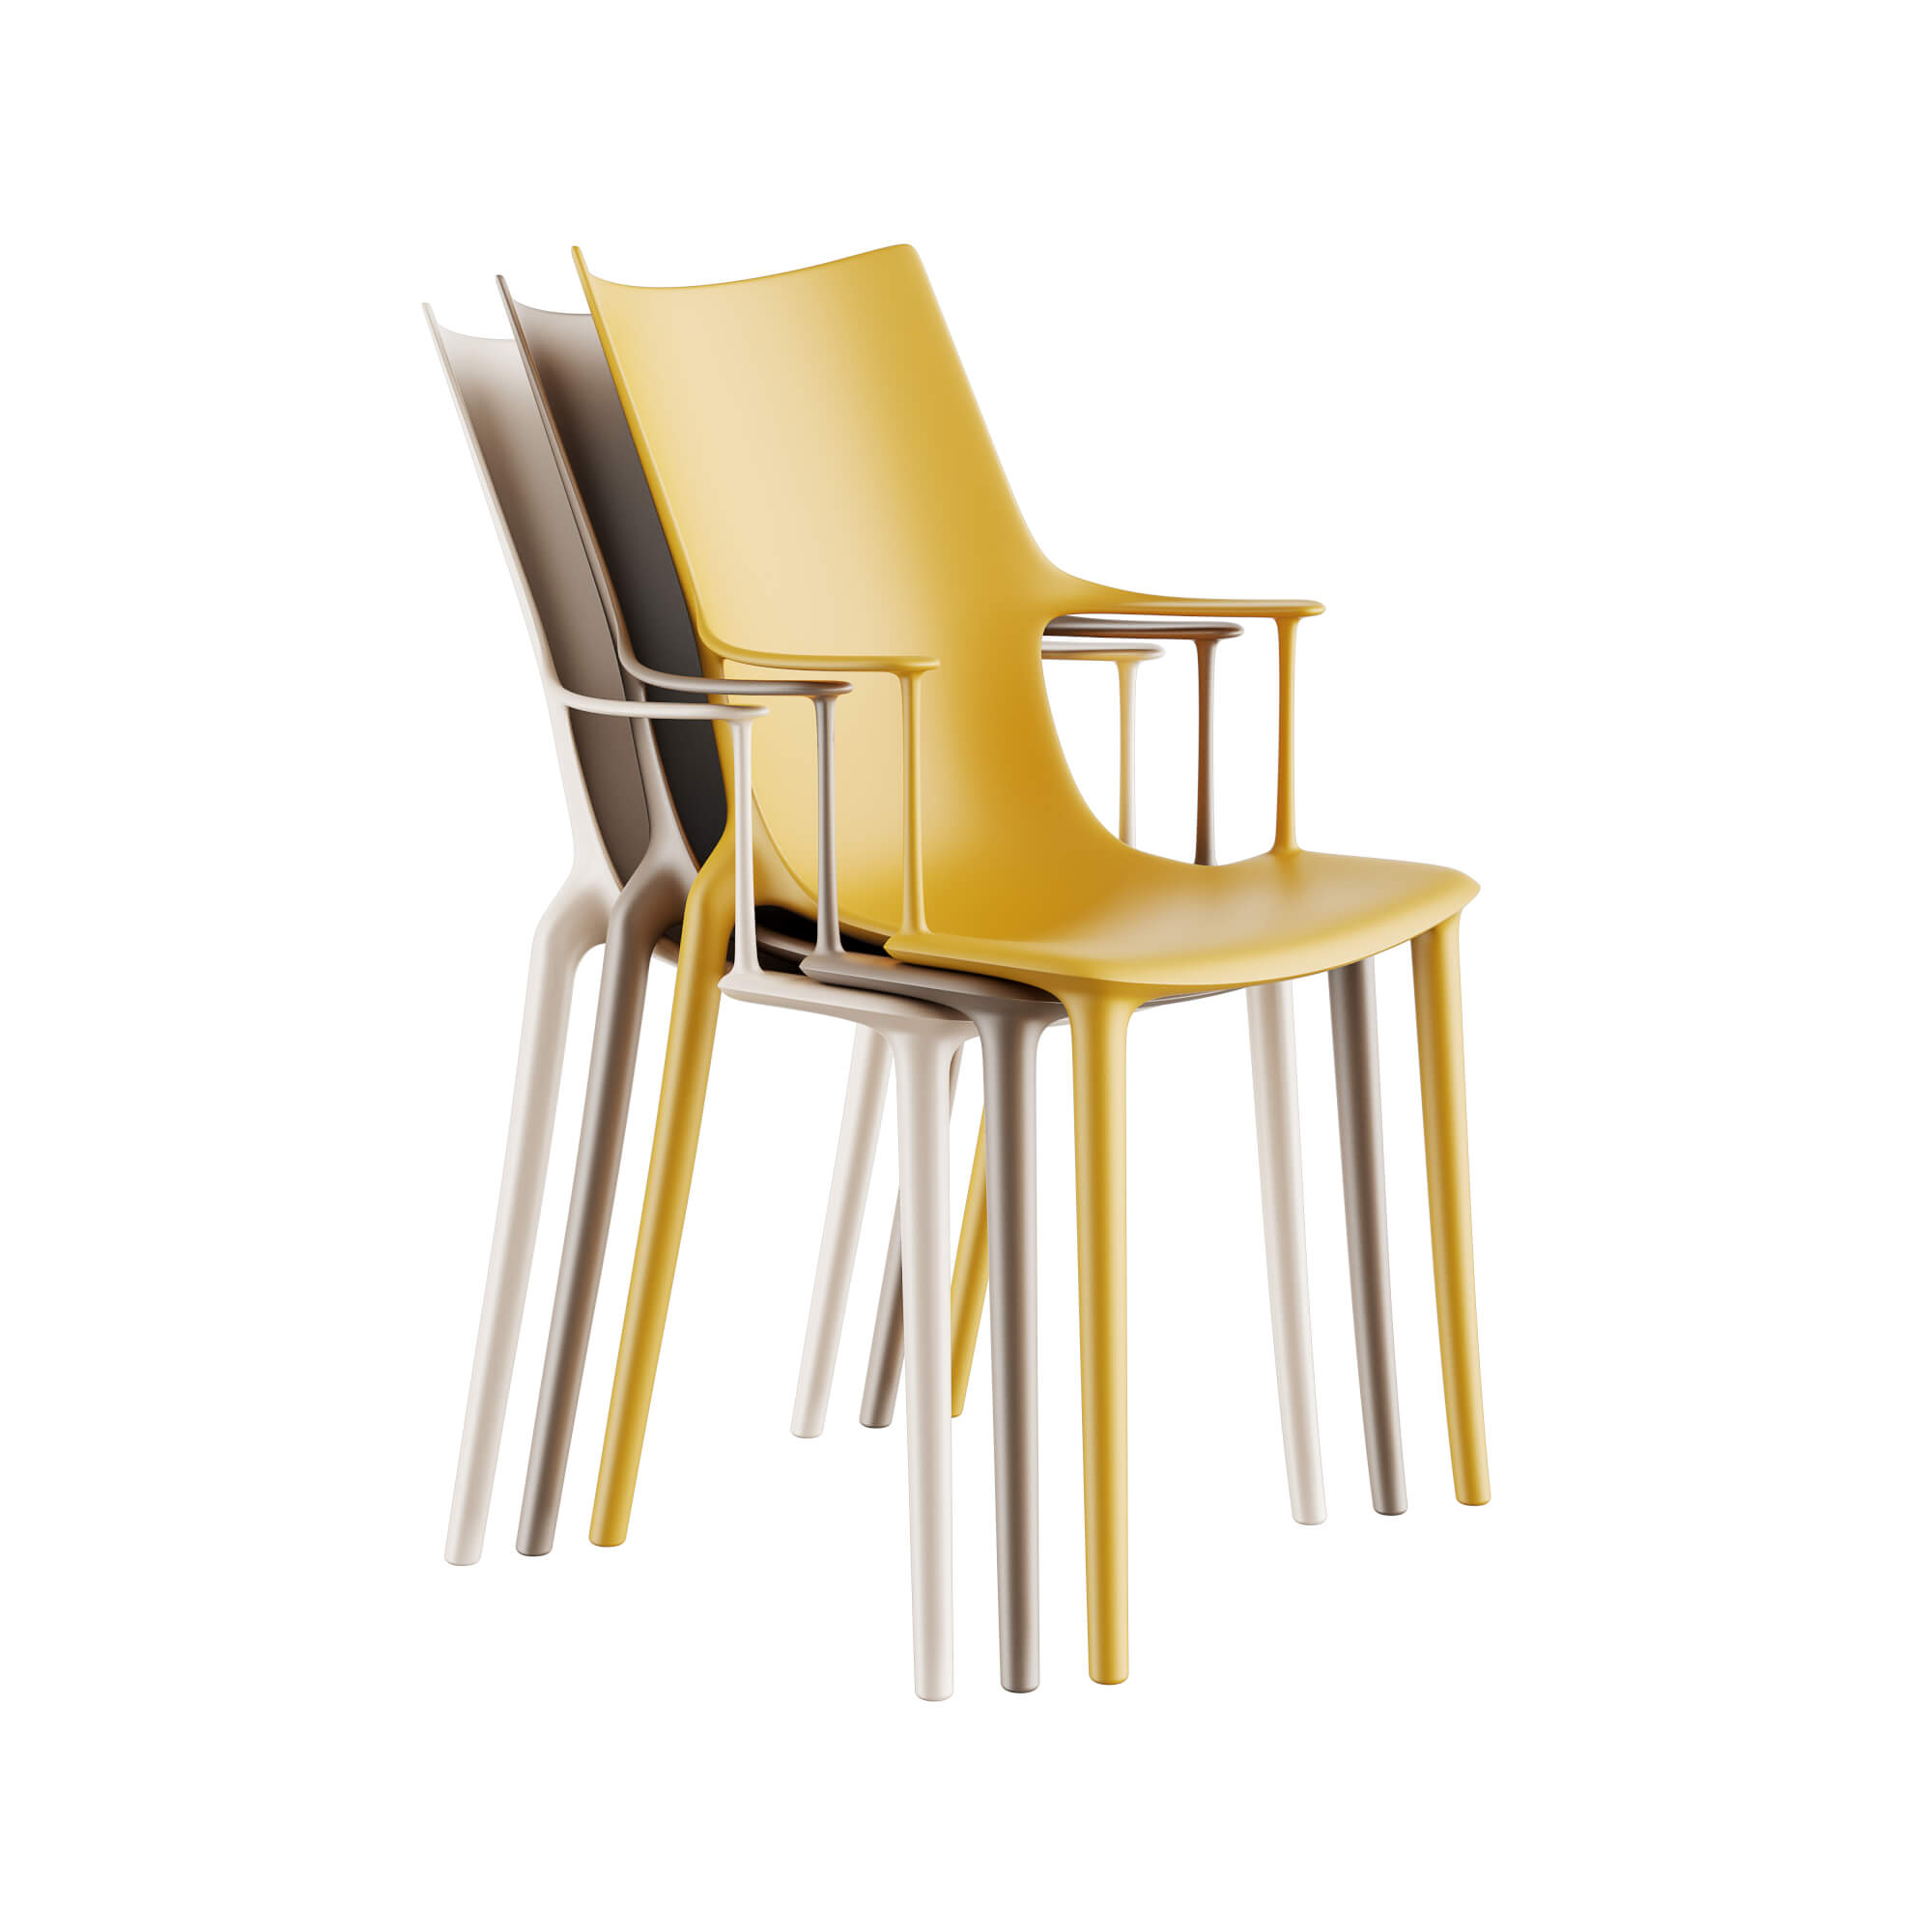  H.H. HER HIGHNESS (KARTELL) - Chairs